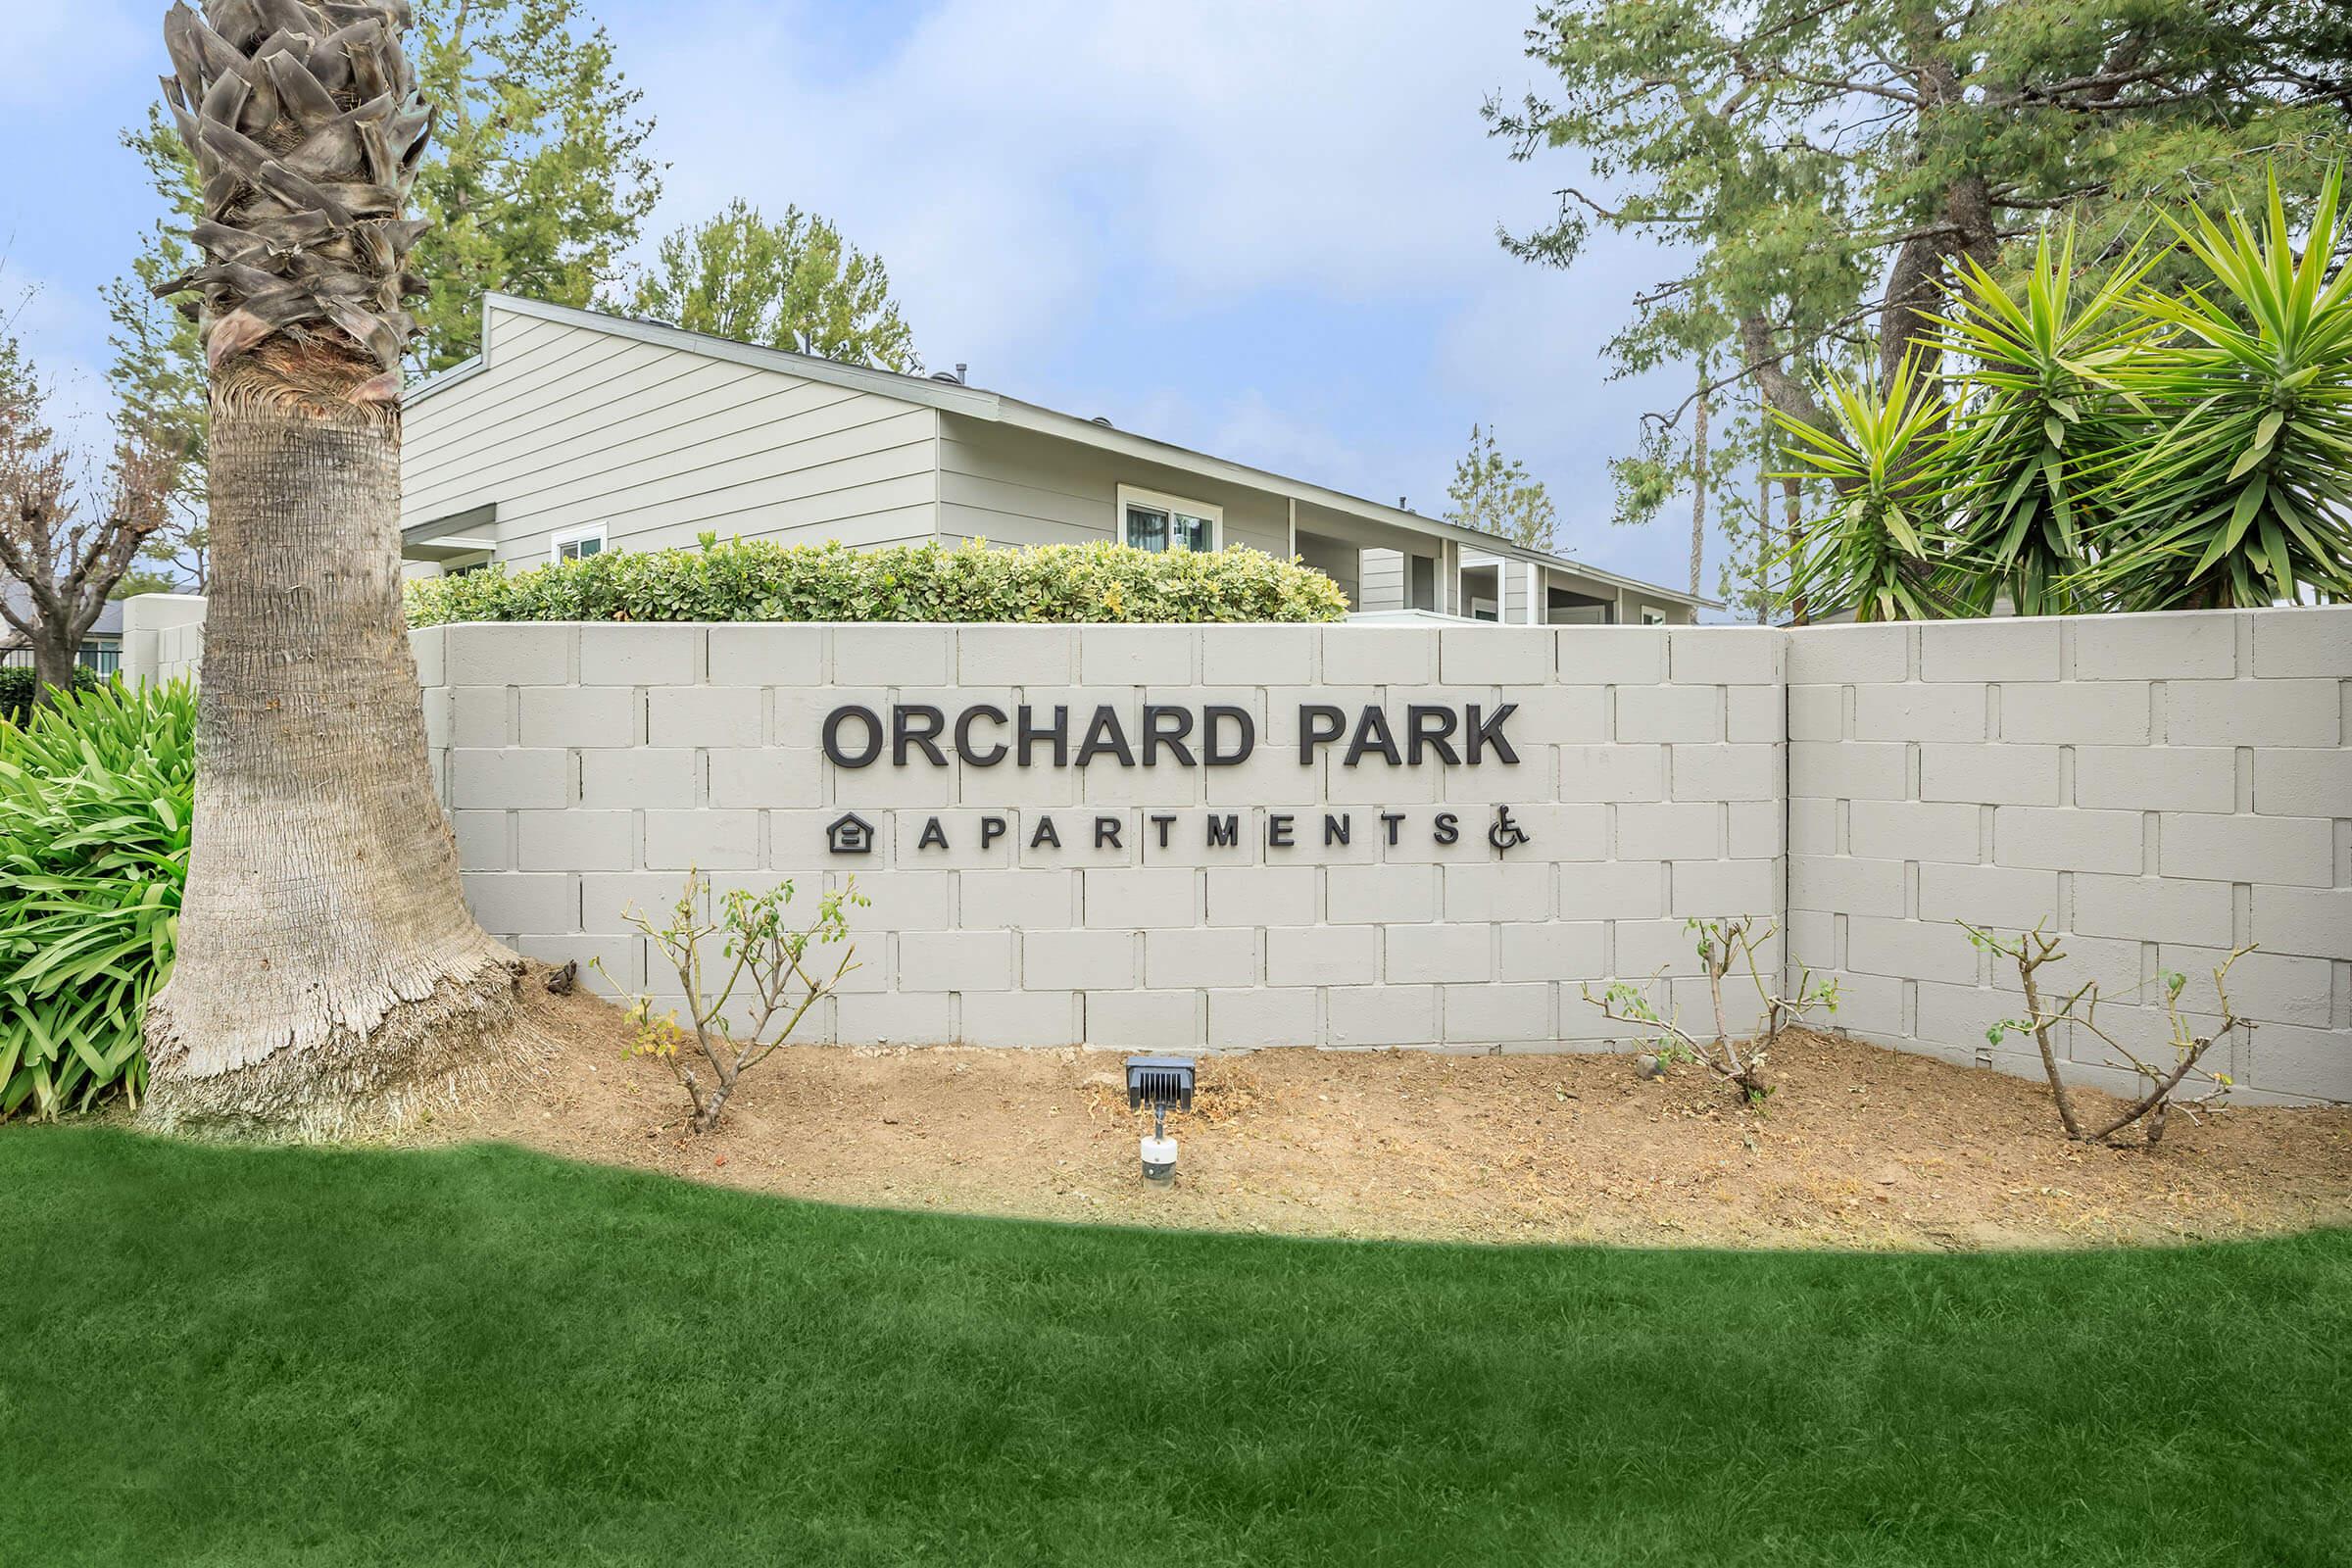 Orchard Park Apartments monument sign